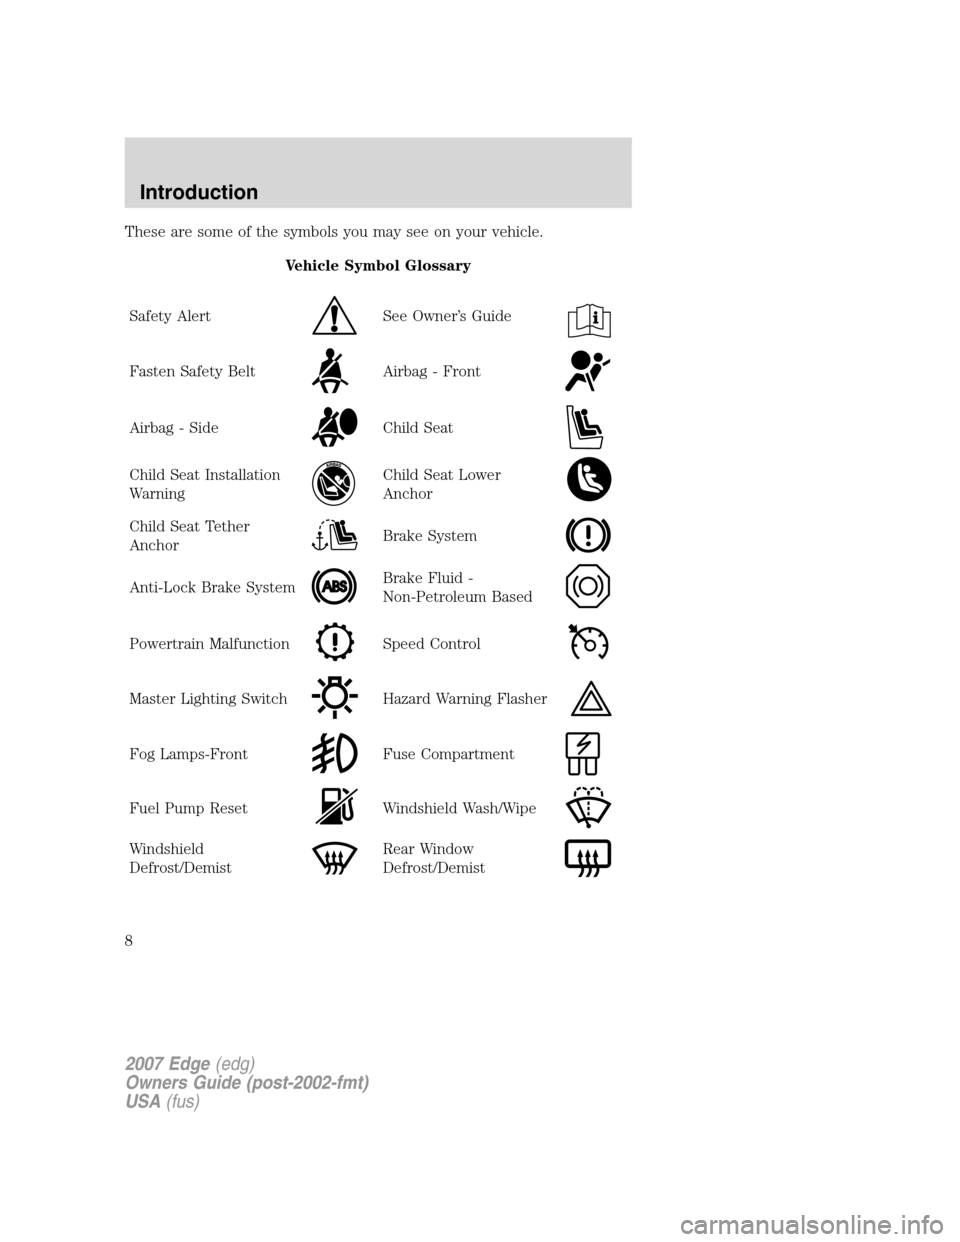 FORD EDGE 2007 1.G Owners Manual These are some of the symbols you may see on your vehicle.
Vehicle Symbol Glossary
Safety Alert
See Owner’s Guide
Fasten Safety BeltAirbag - Front
Airbag - SideChild Seat
Child Seat Installation
War